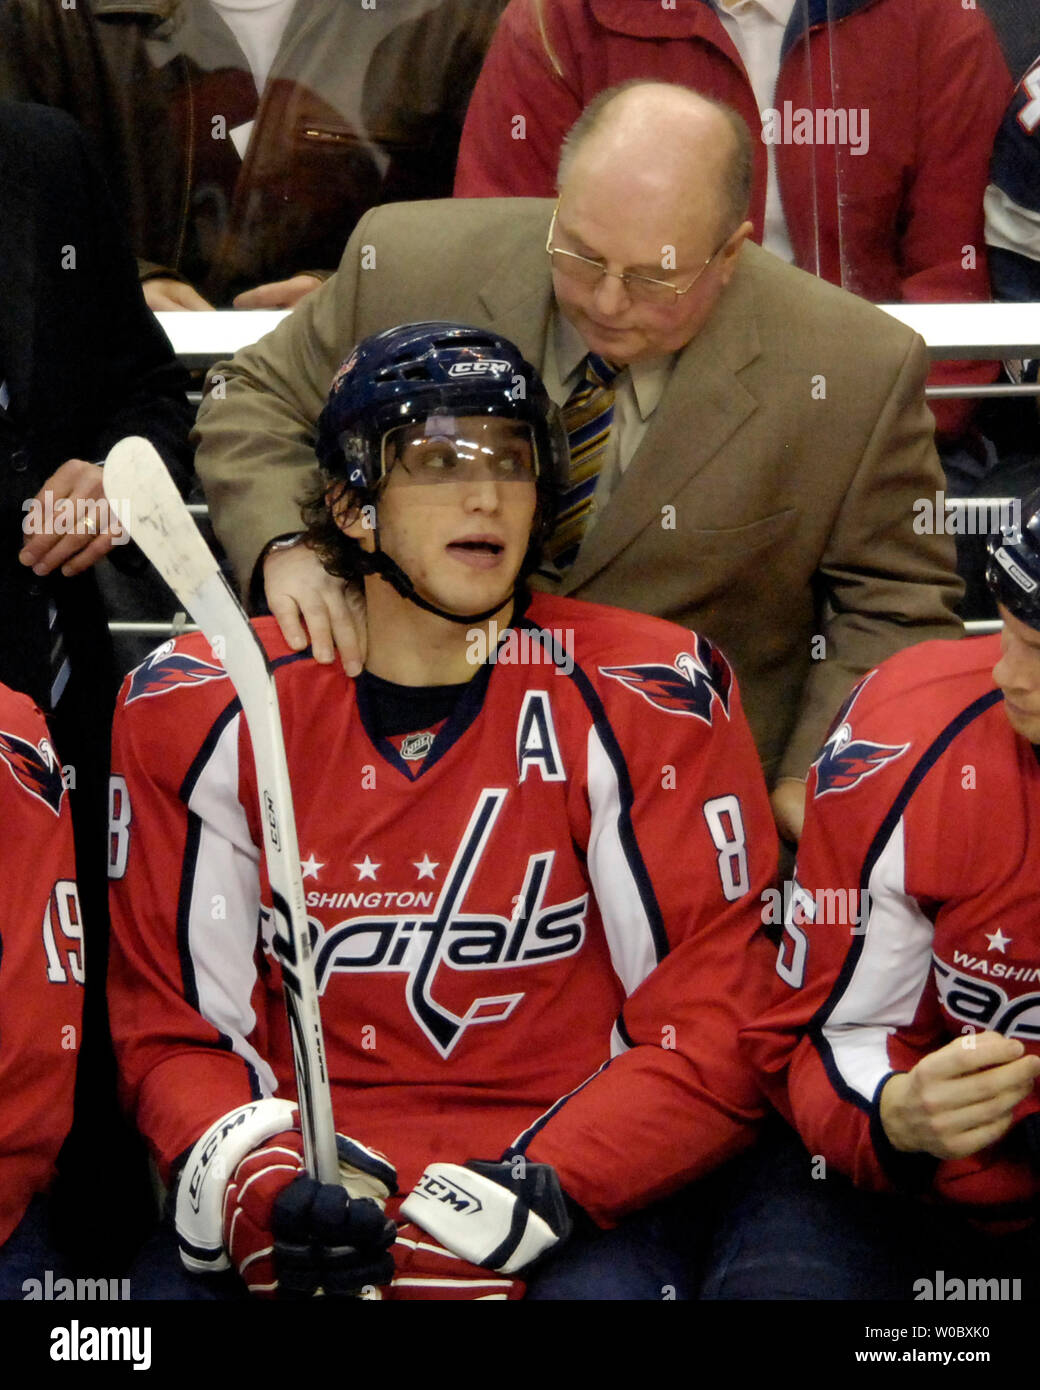 Alex Ovechkin benched: Bruce Boudreau made the right call - The